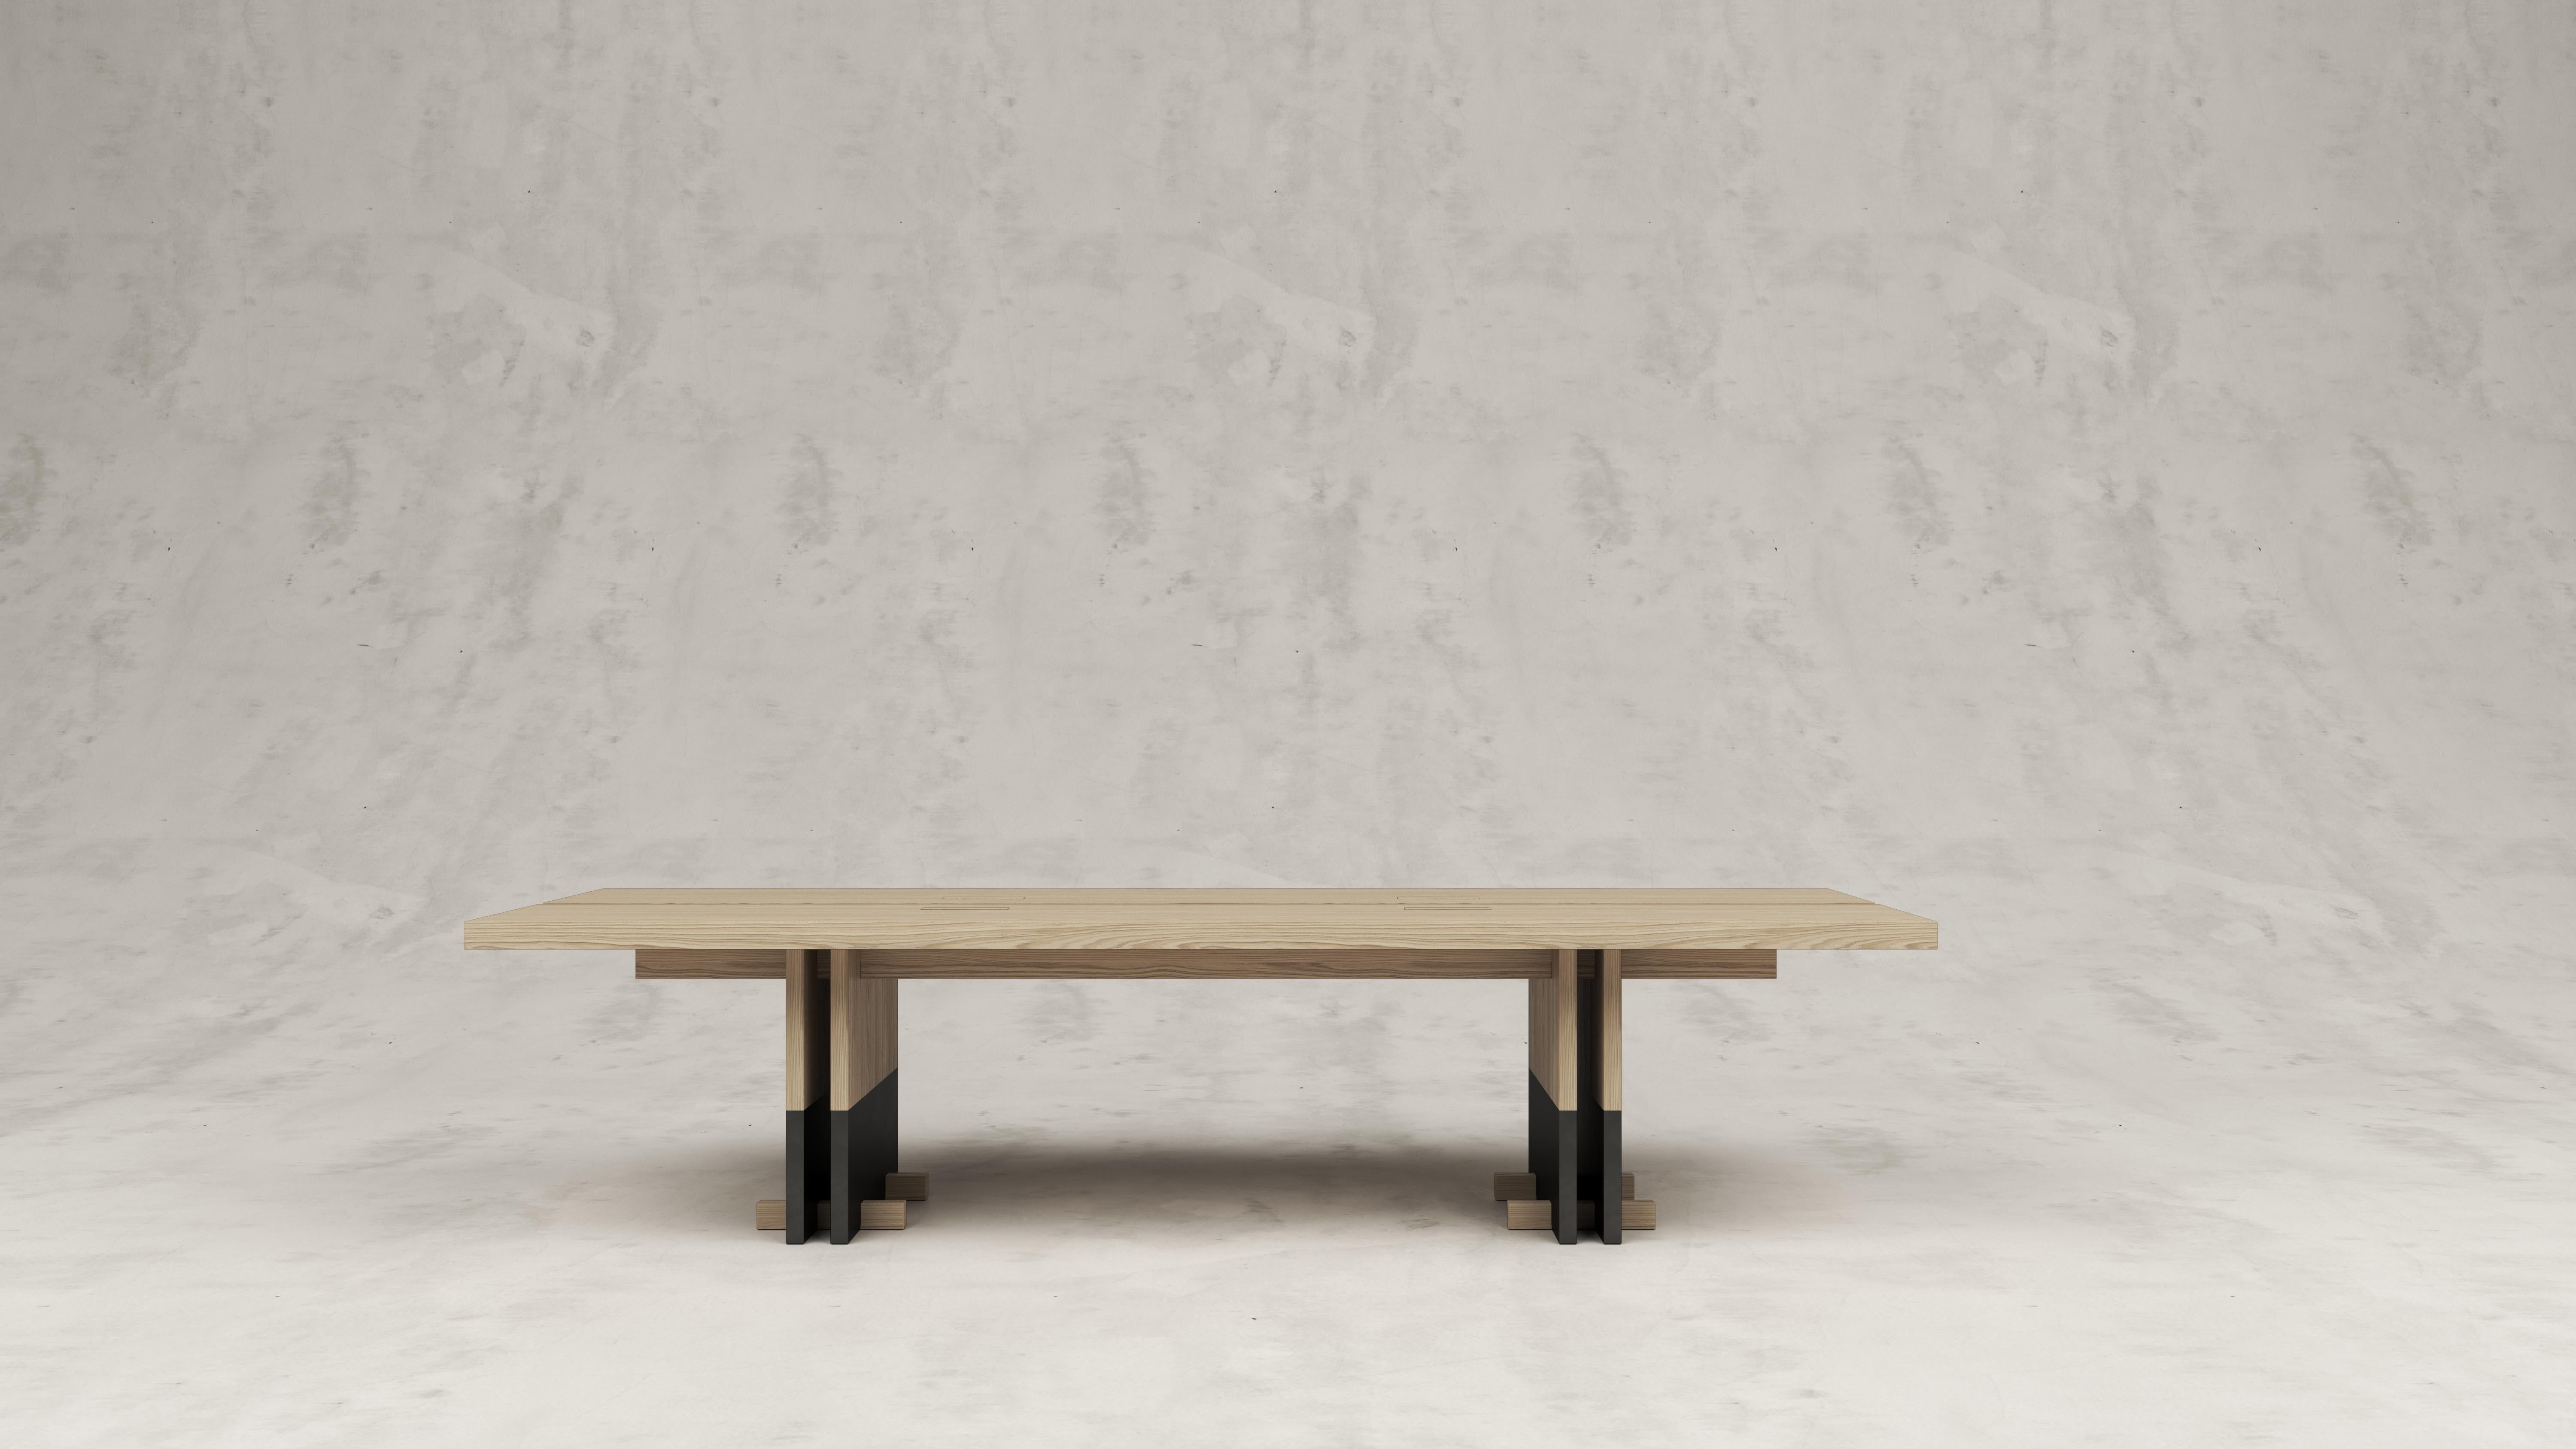 Rift wood dining table by Andy Kerstens
Dimensions: W 240 x D 98 x H 74 cm
Materials: Bleached Oak, Powder coated inox
Optional little feet at table legs.
Handmade in Belgium

Available in Solid Larch, Oak and Walnut and in 320 x 102 x 74 cm,